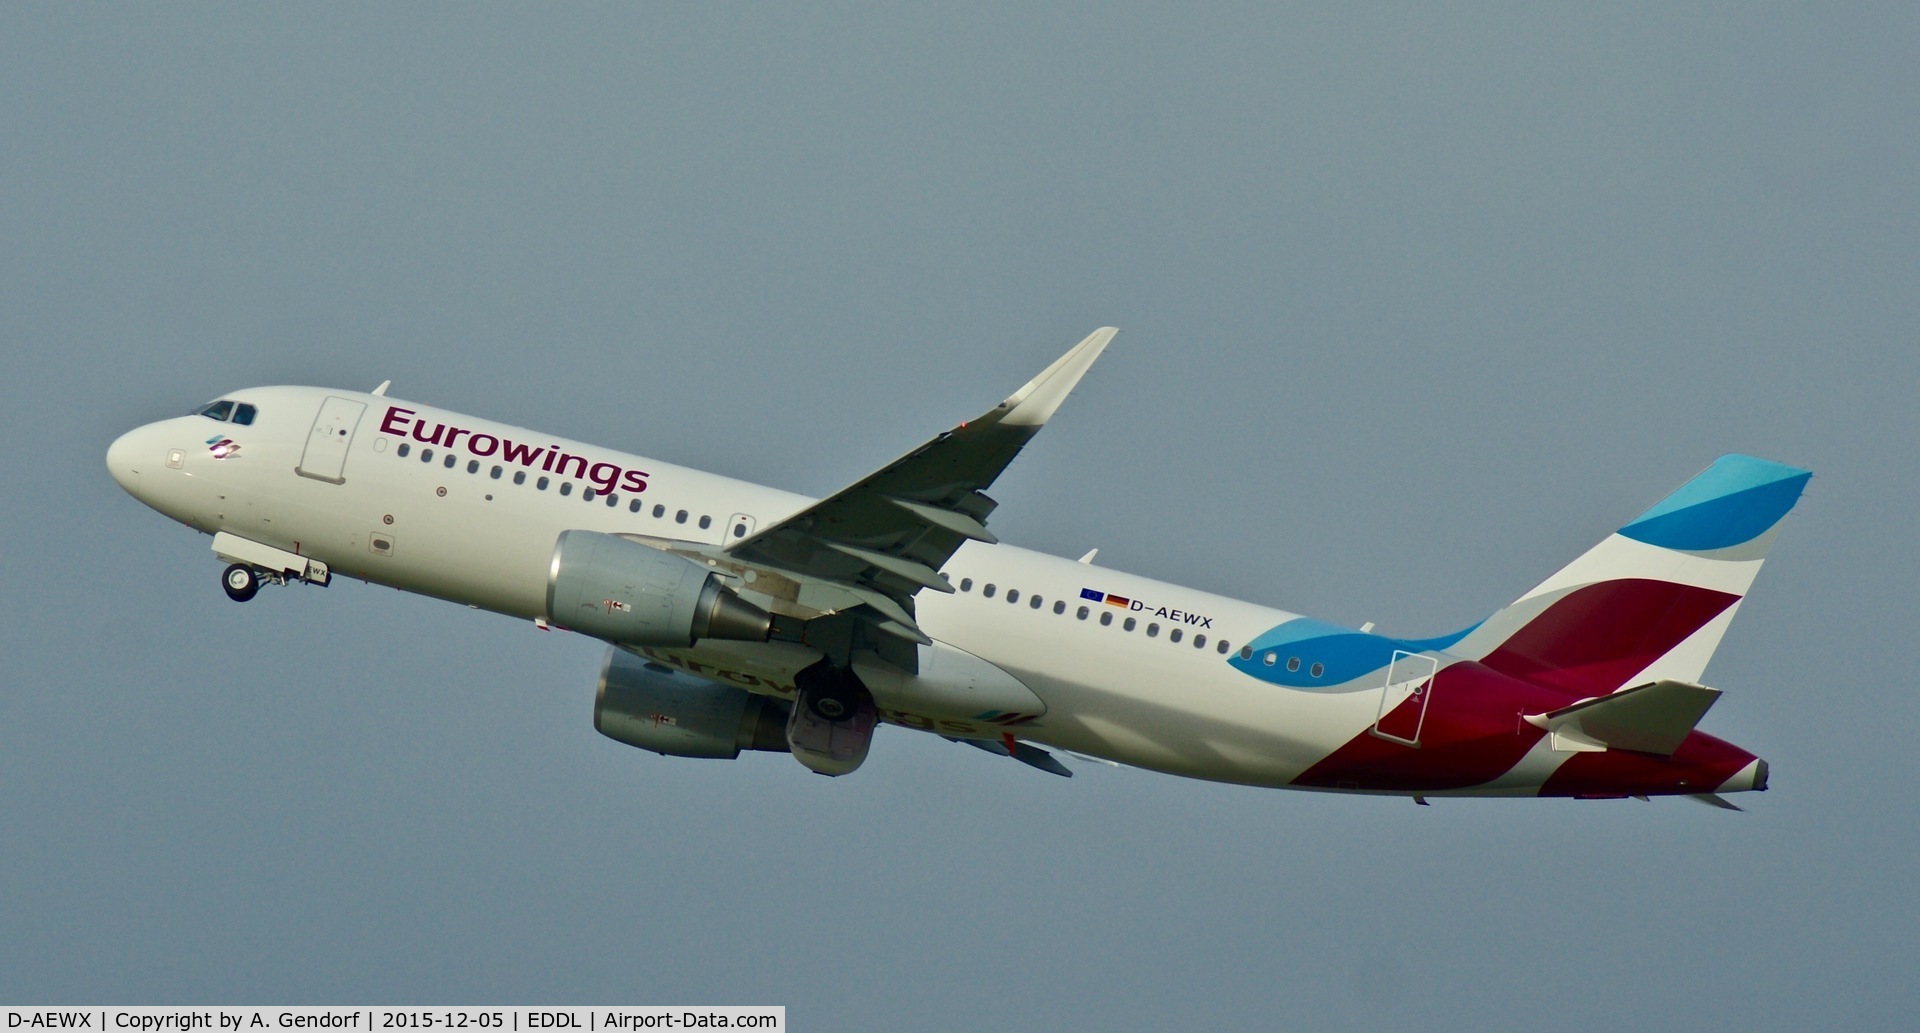 D-AEWX, 2015 Airbus A320-214 C/N 6807, Eurowings, is here climbing out at Düsseldorf Int'l(EDDL)